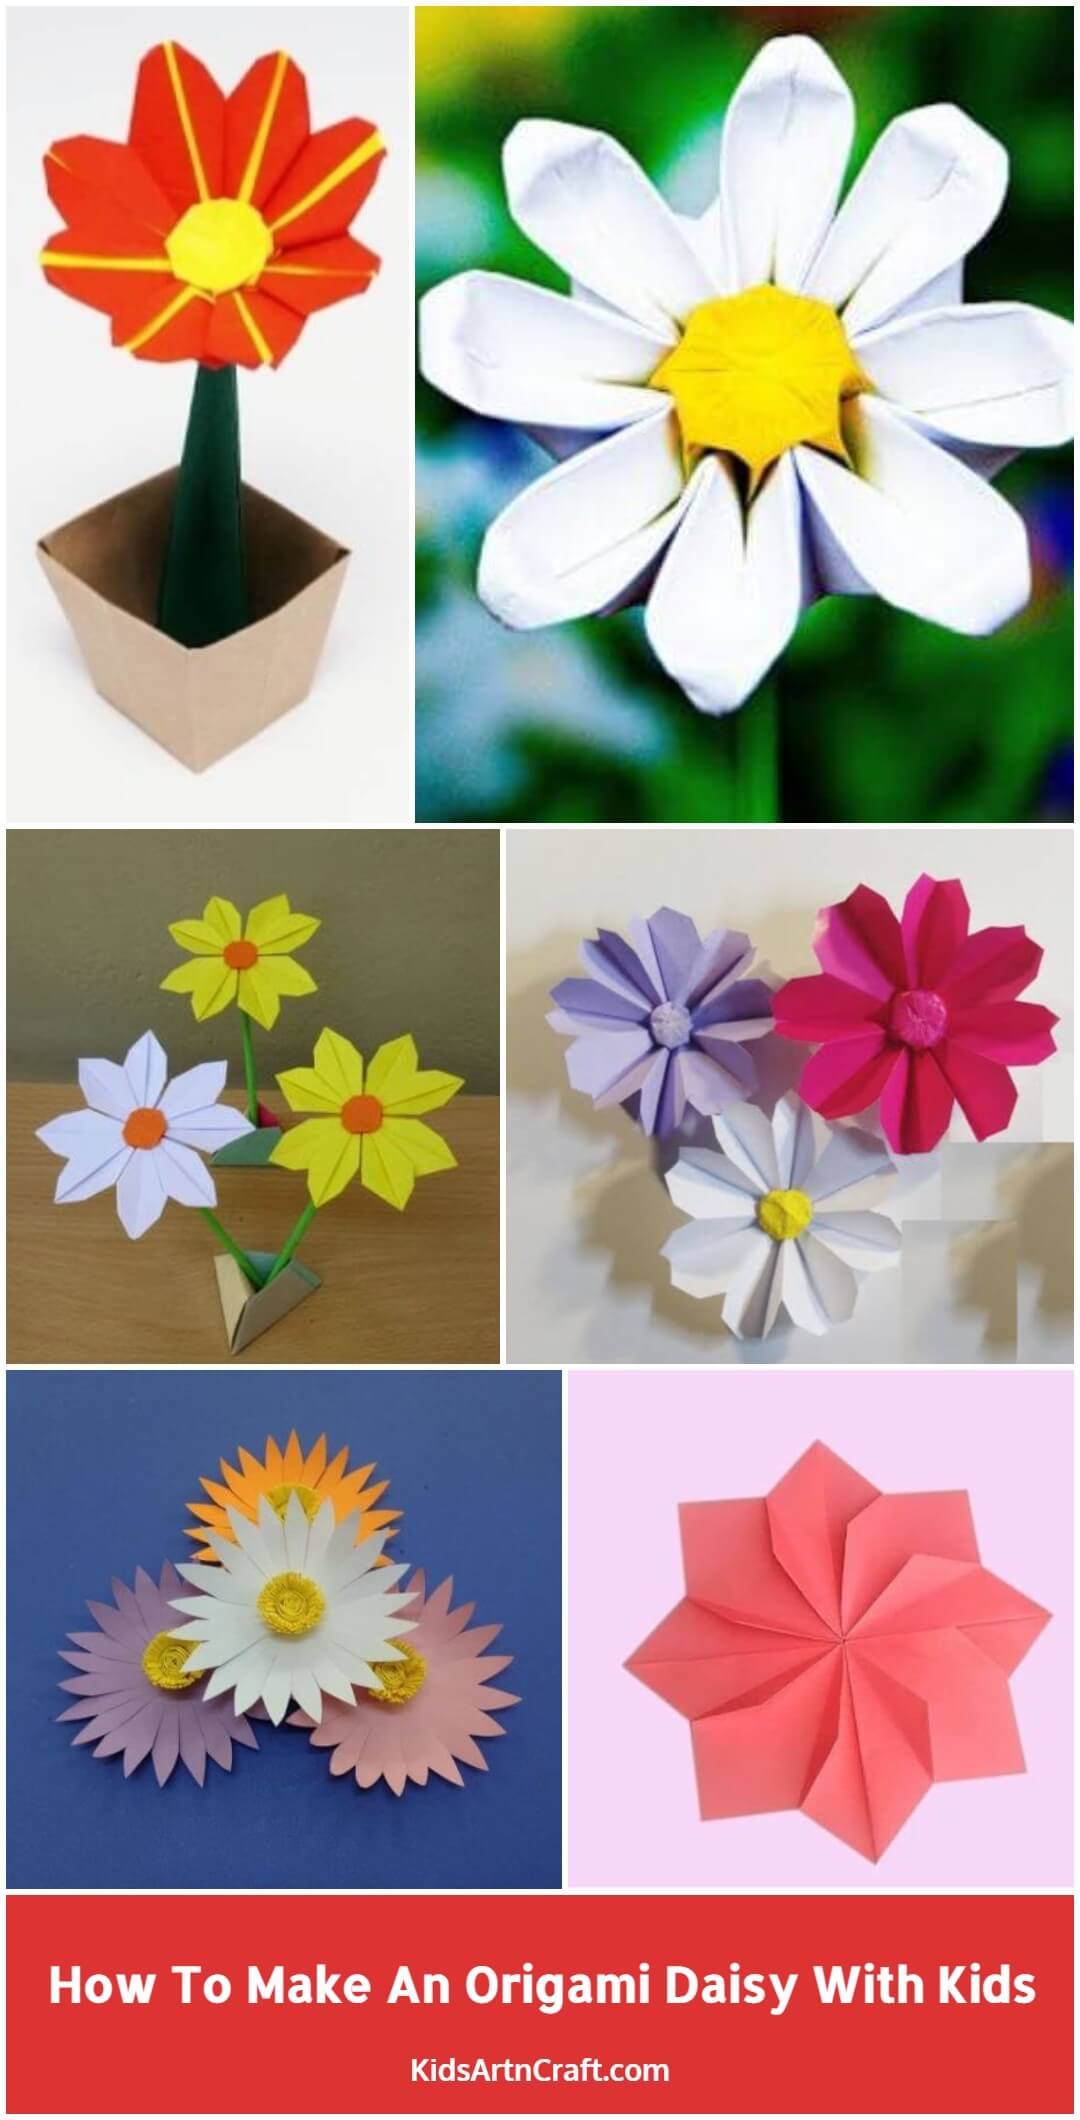 How To Make An Origami Daisy With Kids